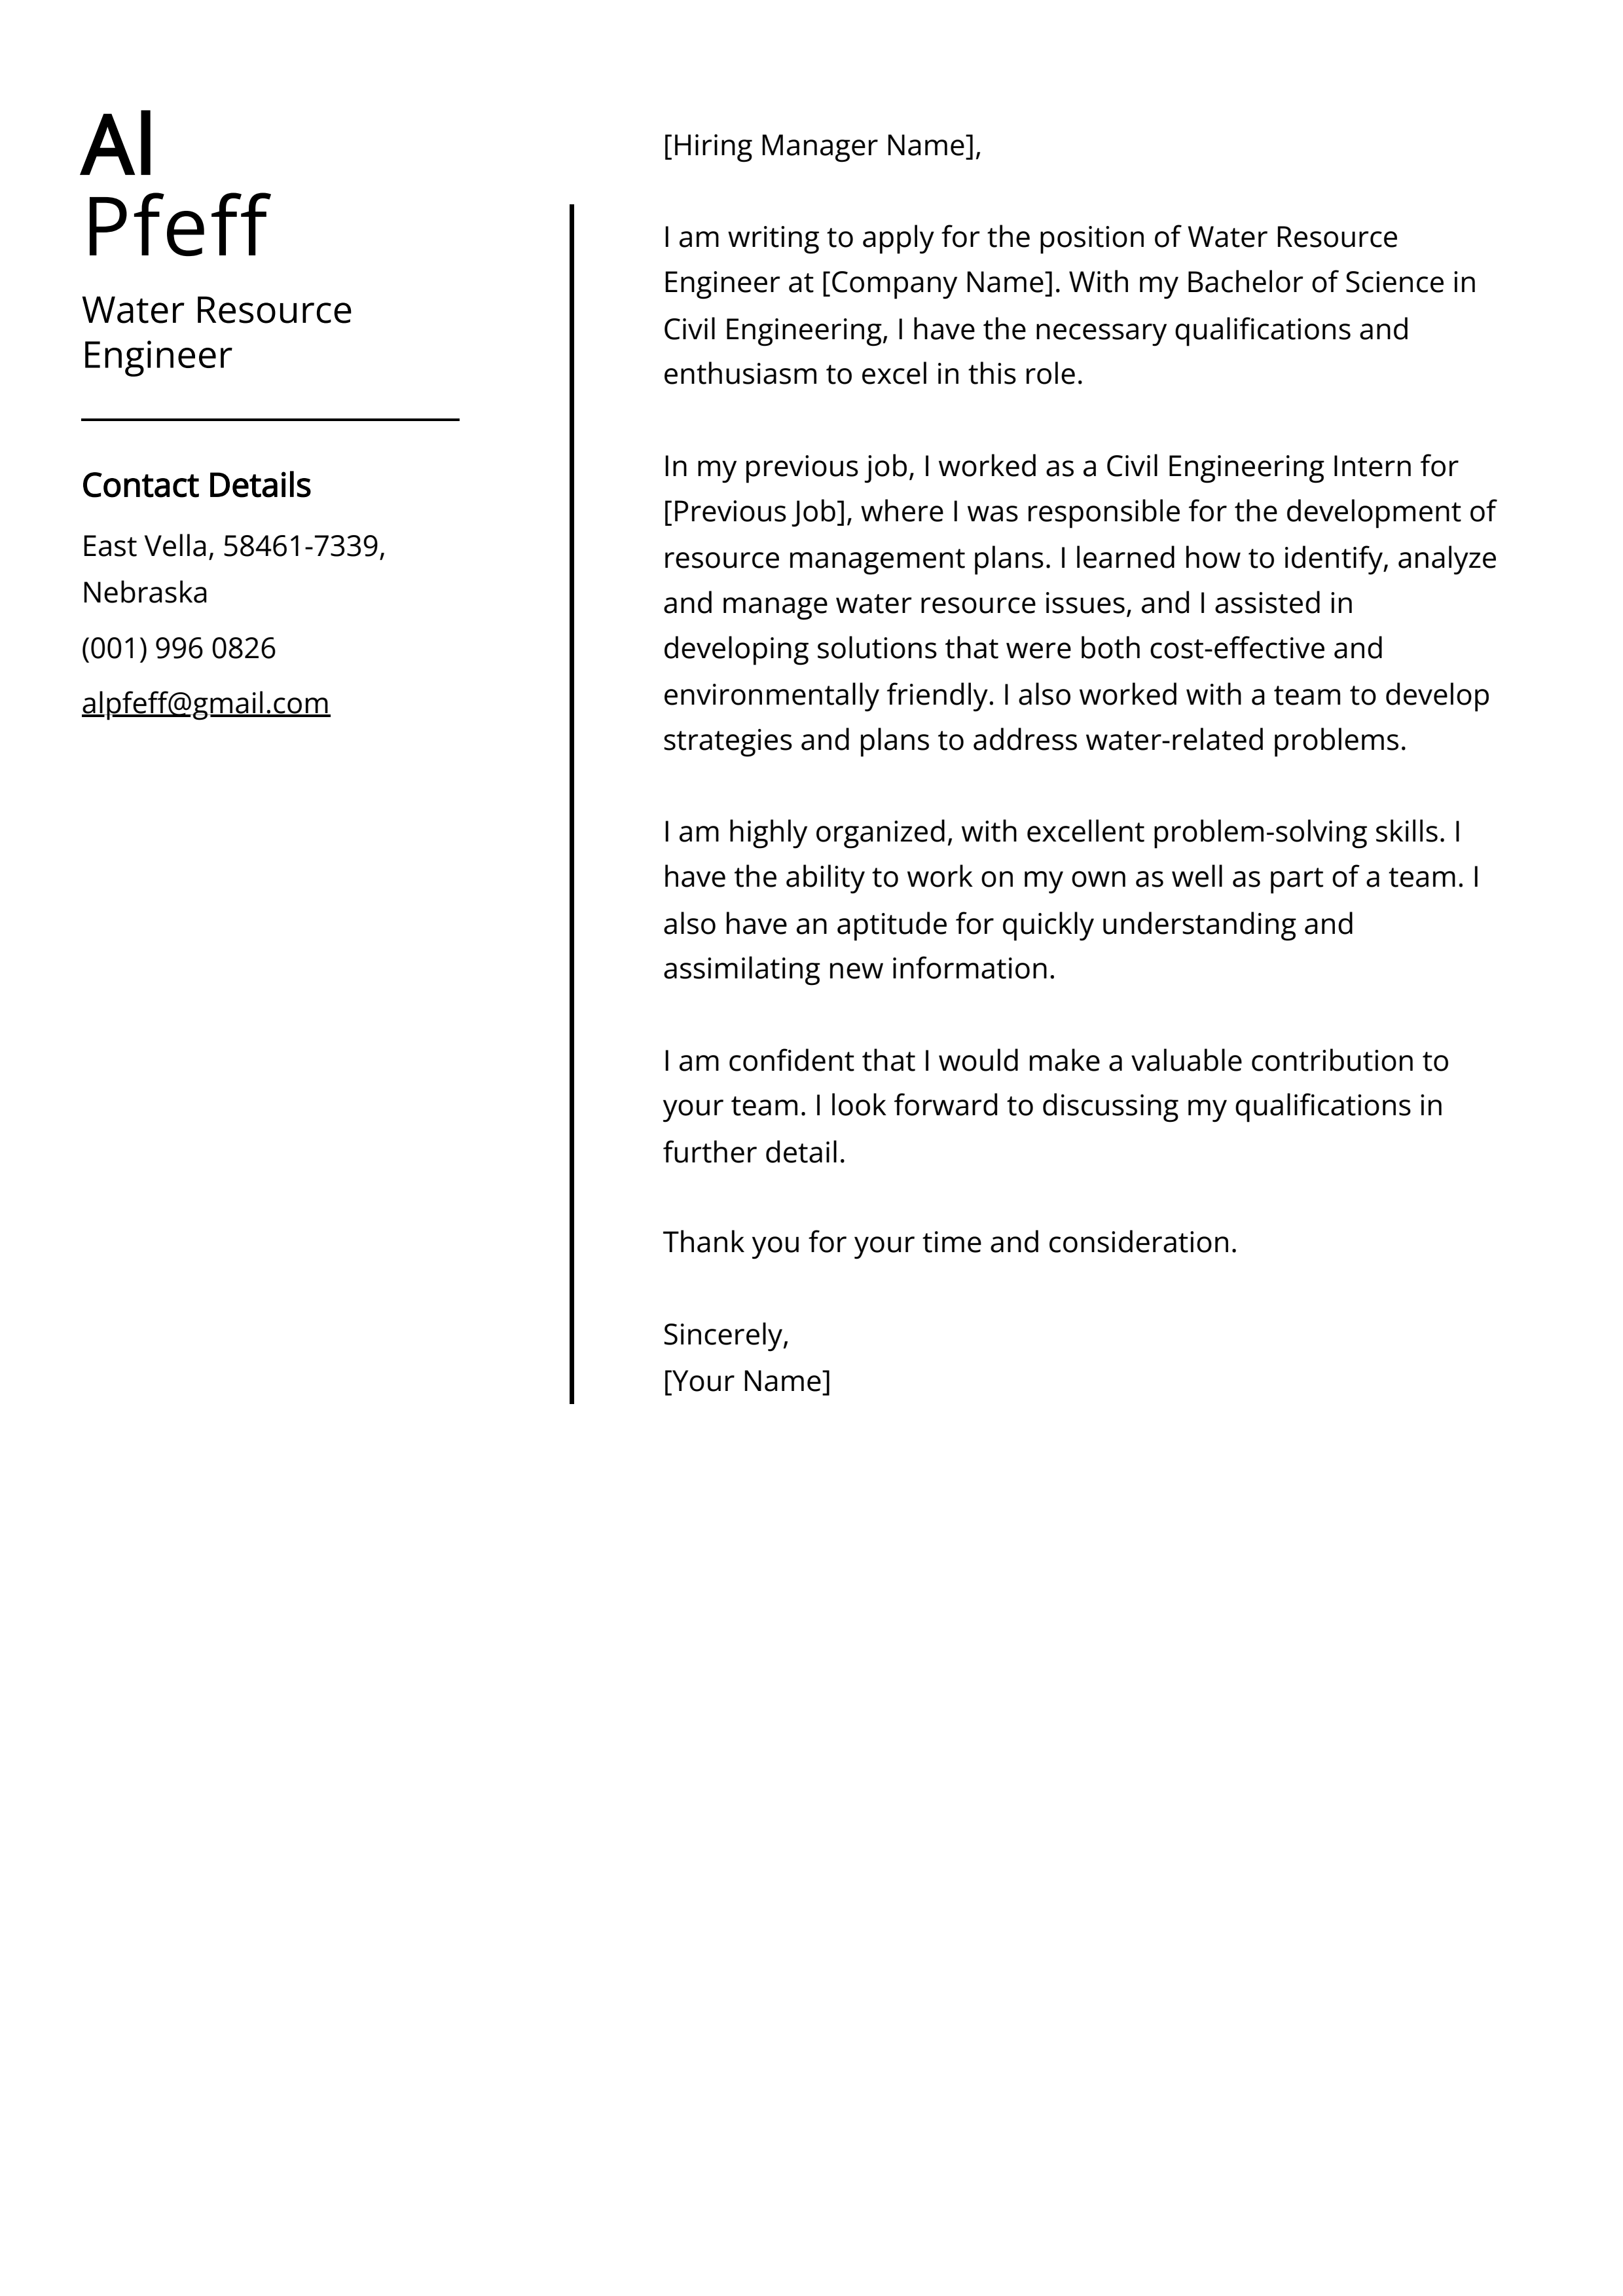 Water Resource Engineer Cover Letter Example